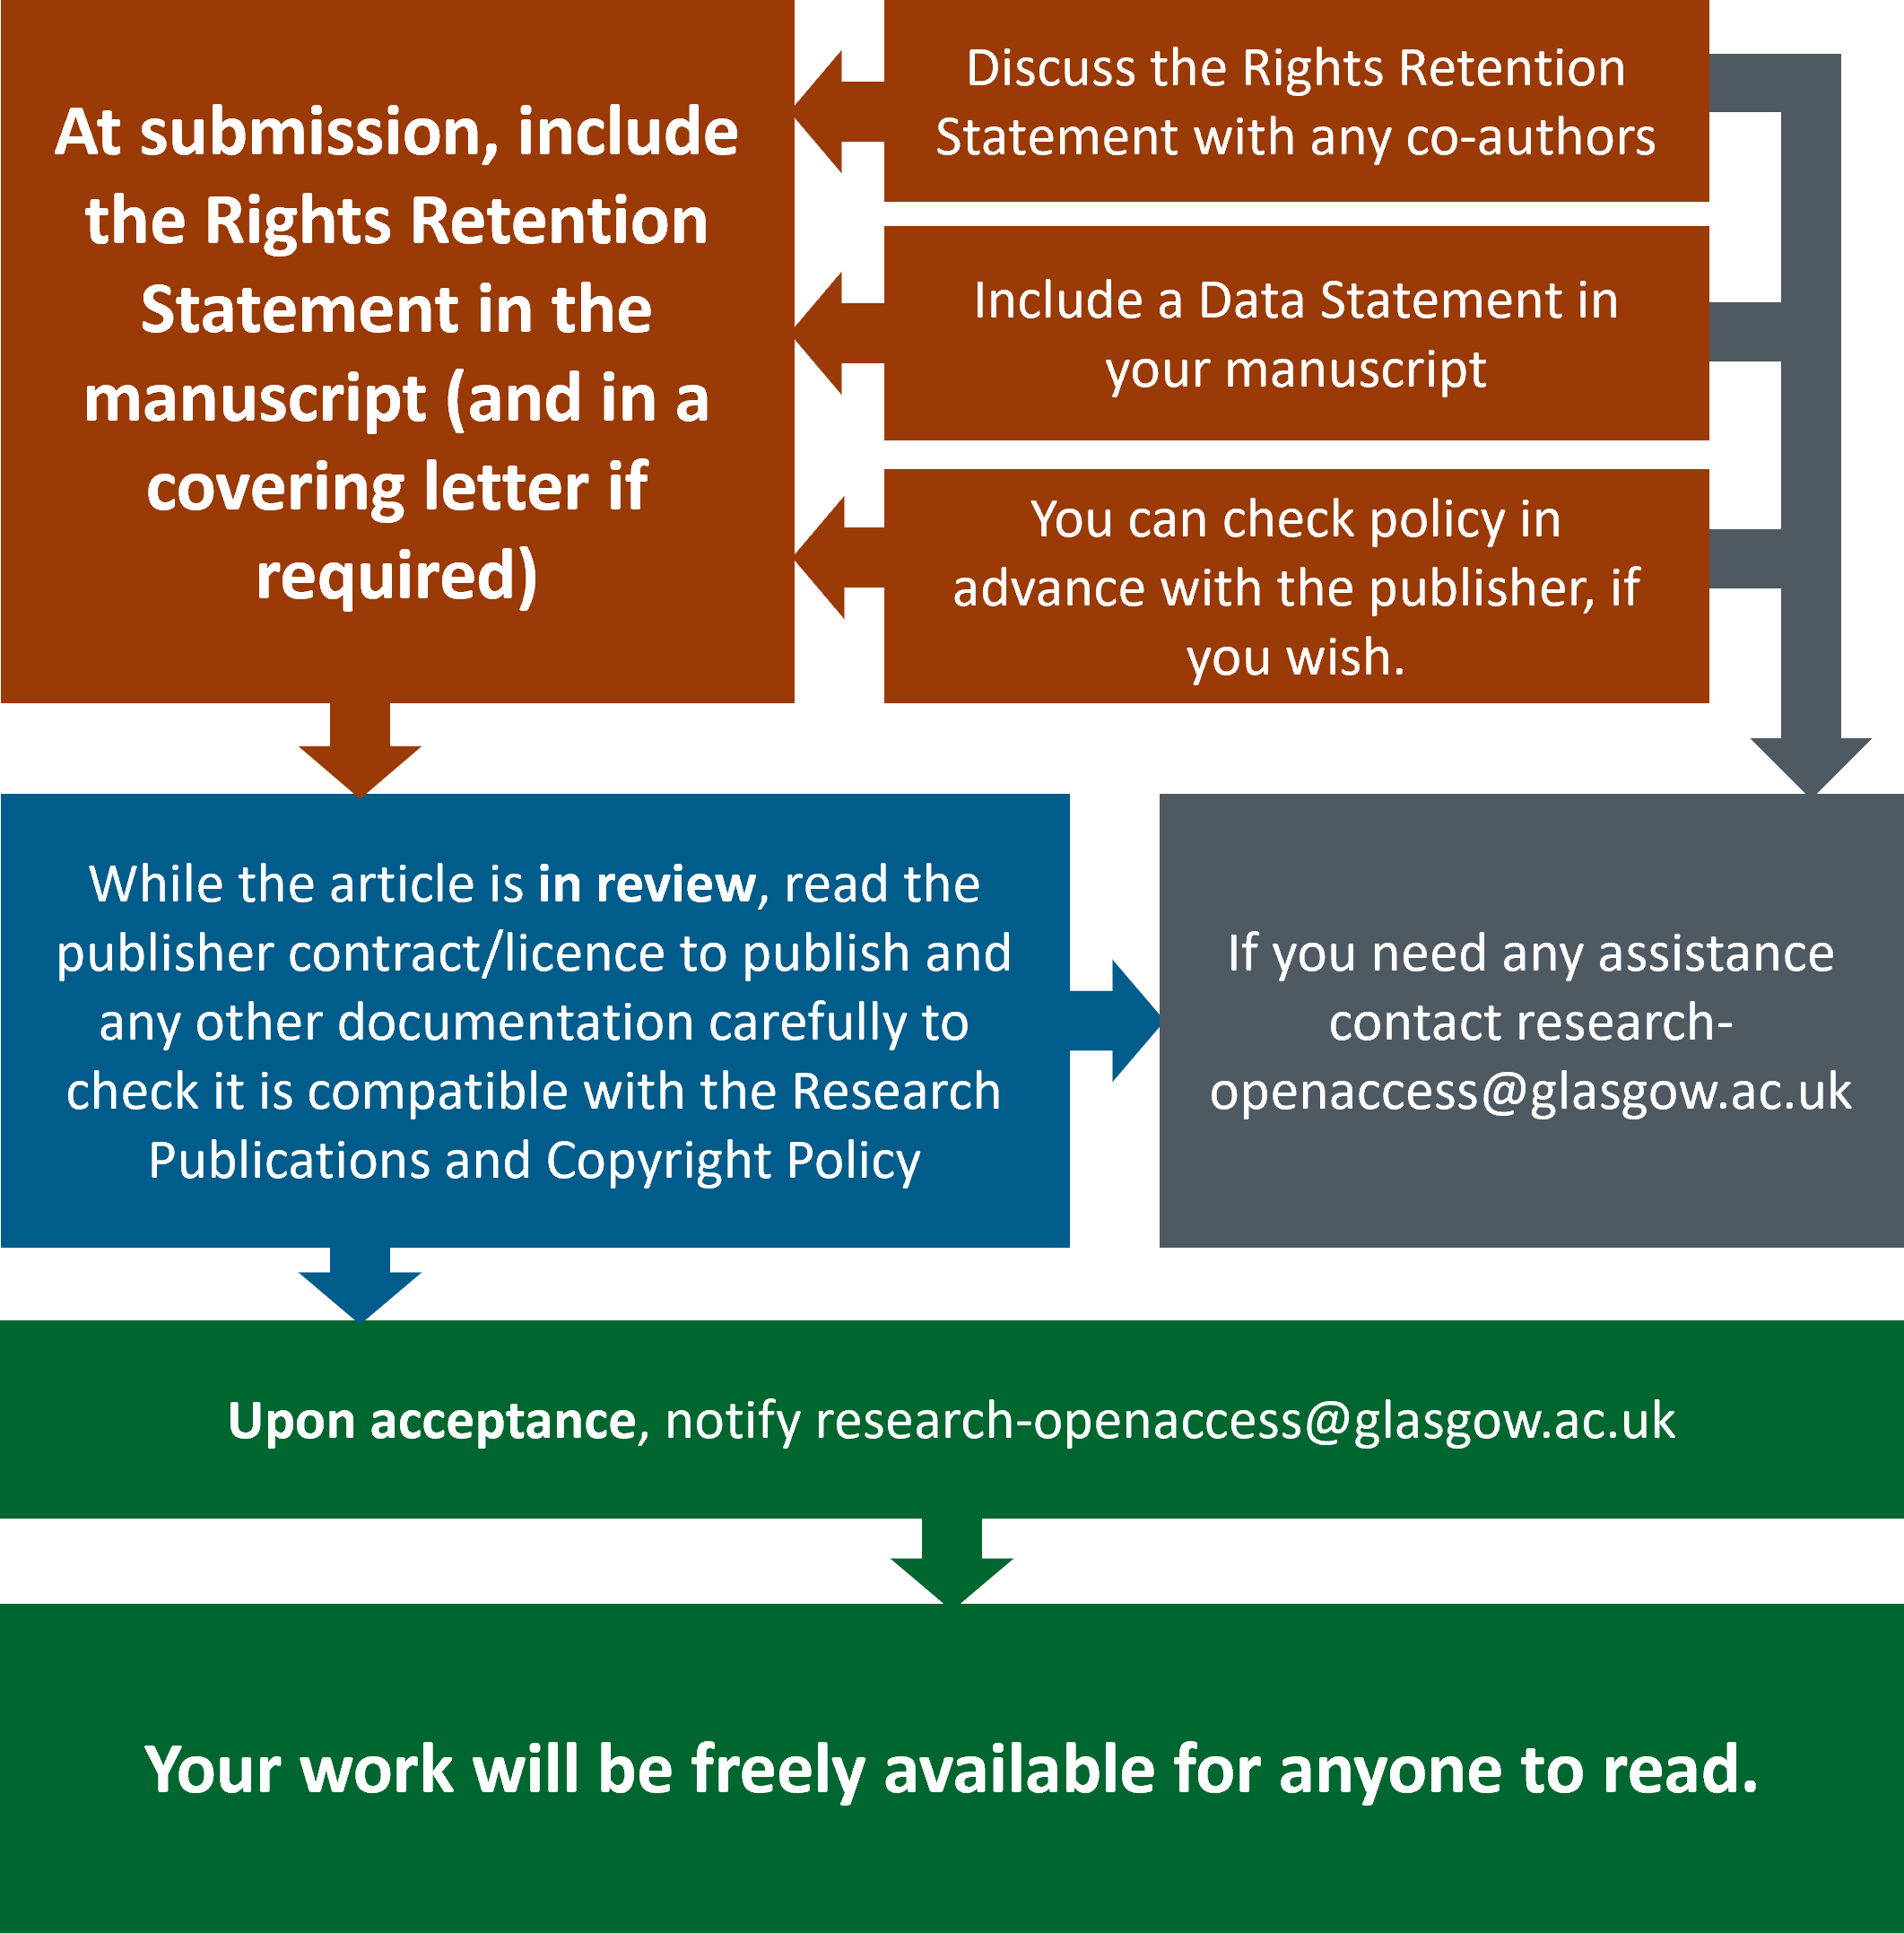 Rights Retention Workflow for Authors